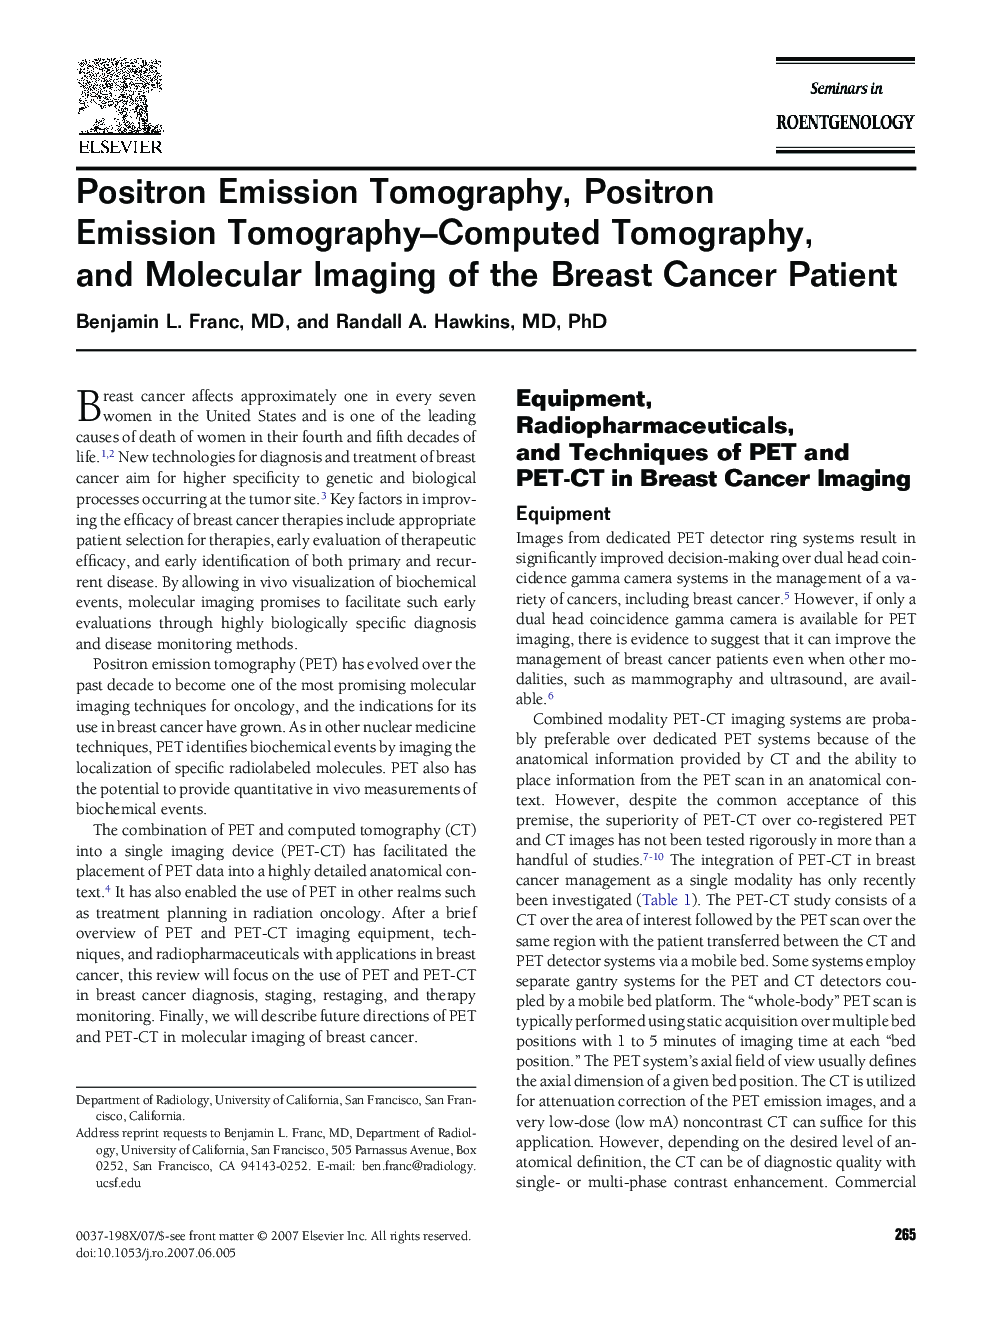 Positron Emission Tomography, Positron Emission Tomography-Computed Tomography, and Molecular Imaging of the Breast Cancer Patient